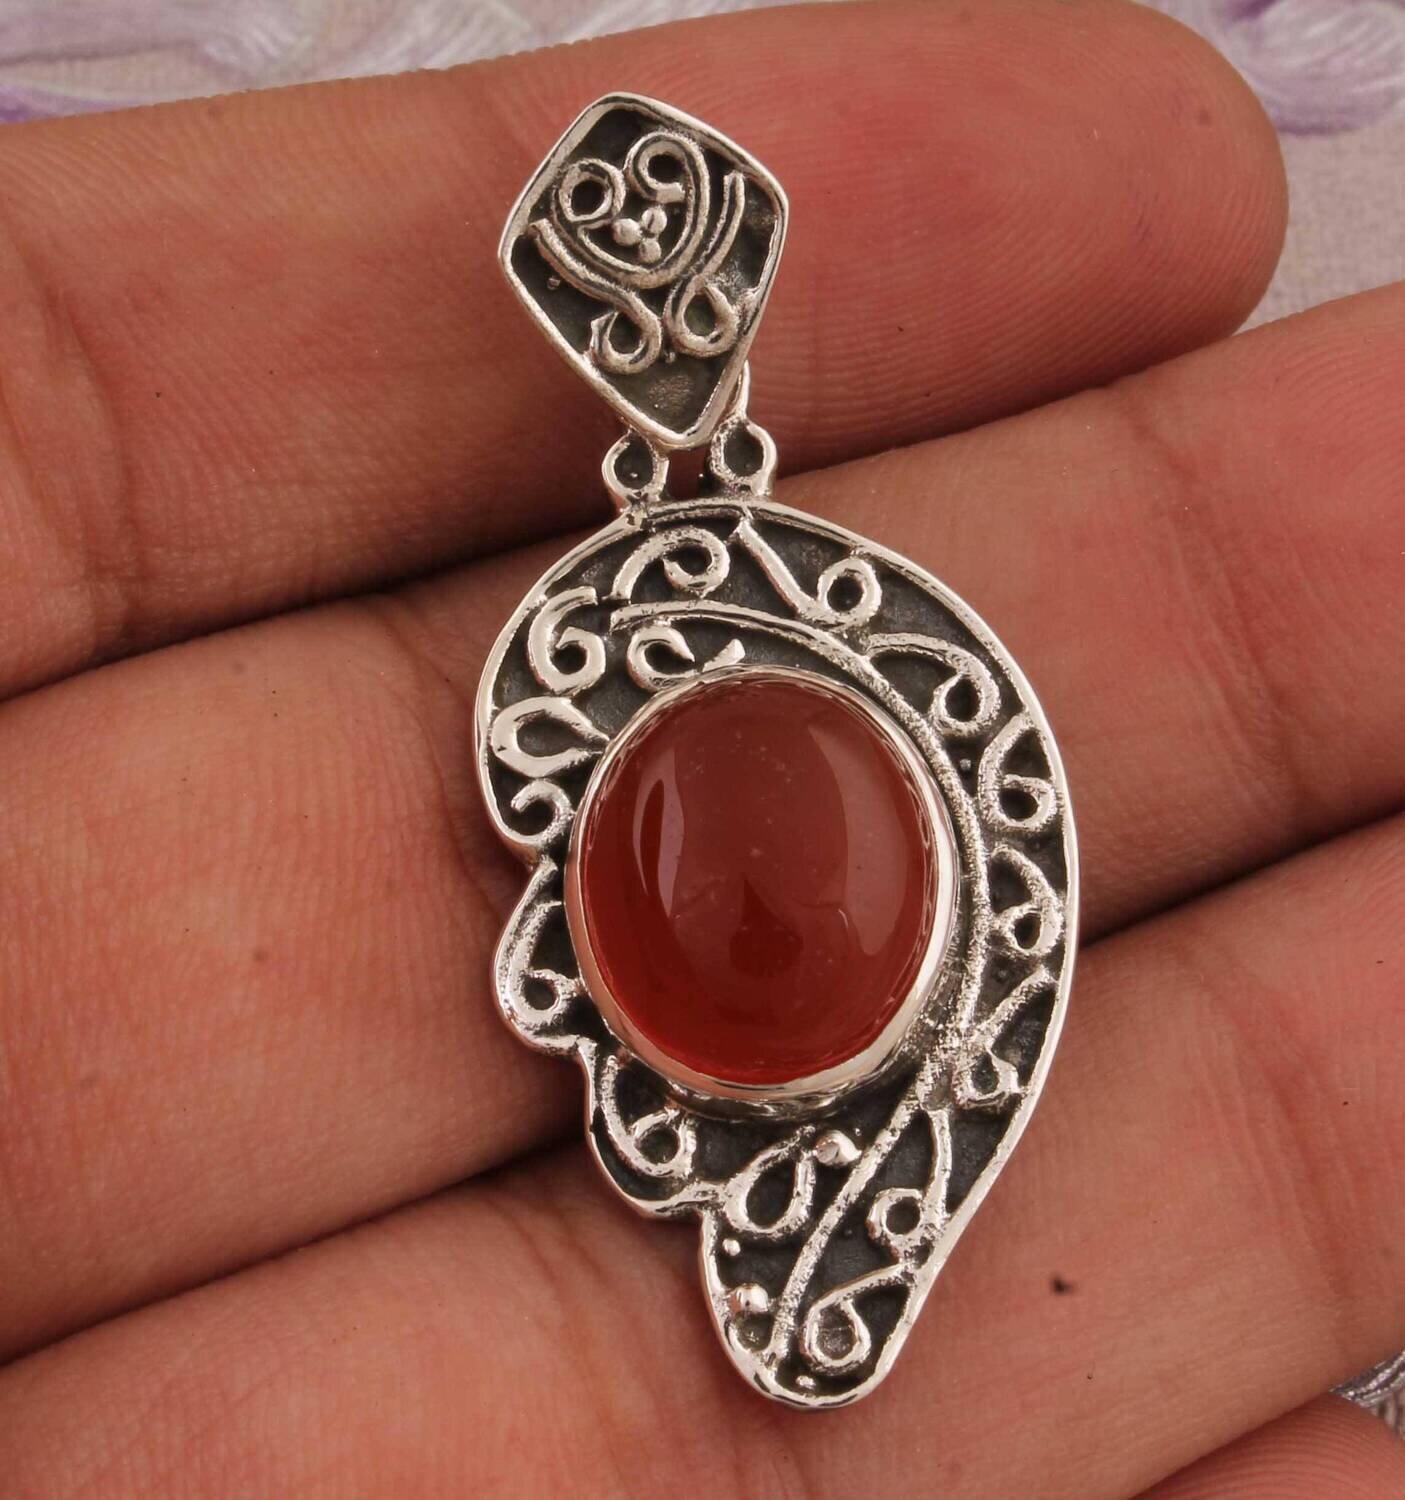 Natural Amazing Red Onyx AAA+Quality Gemstone Pendant 925-Antique Solid Silver Pendant,Sterling Silver Pendant,Leaf Pendant,Gift for Her